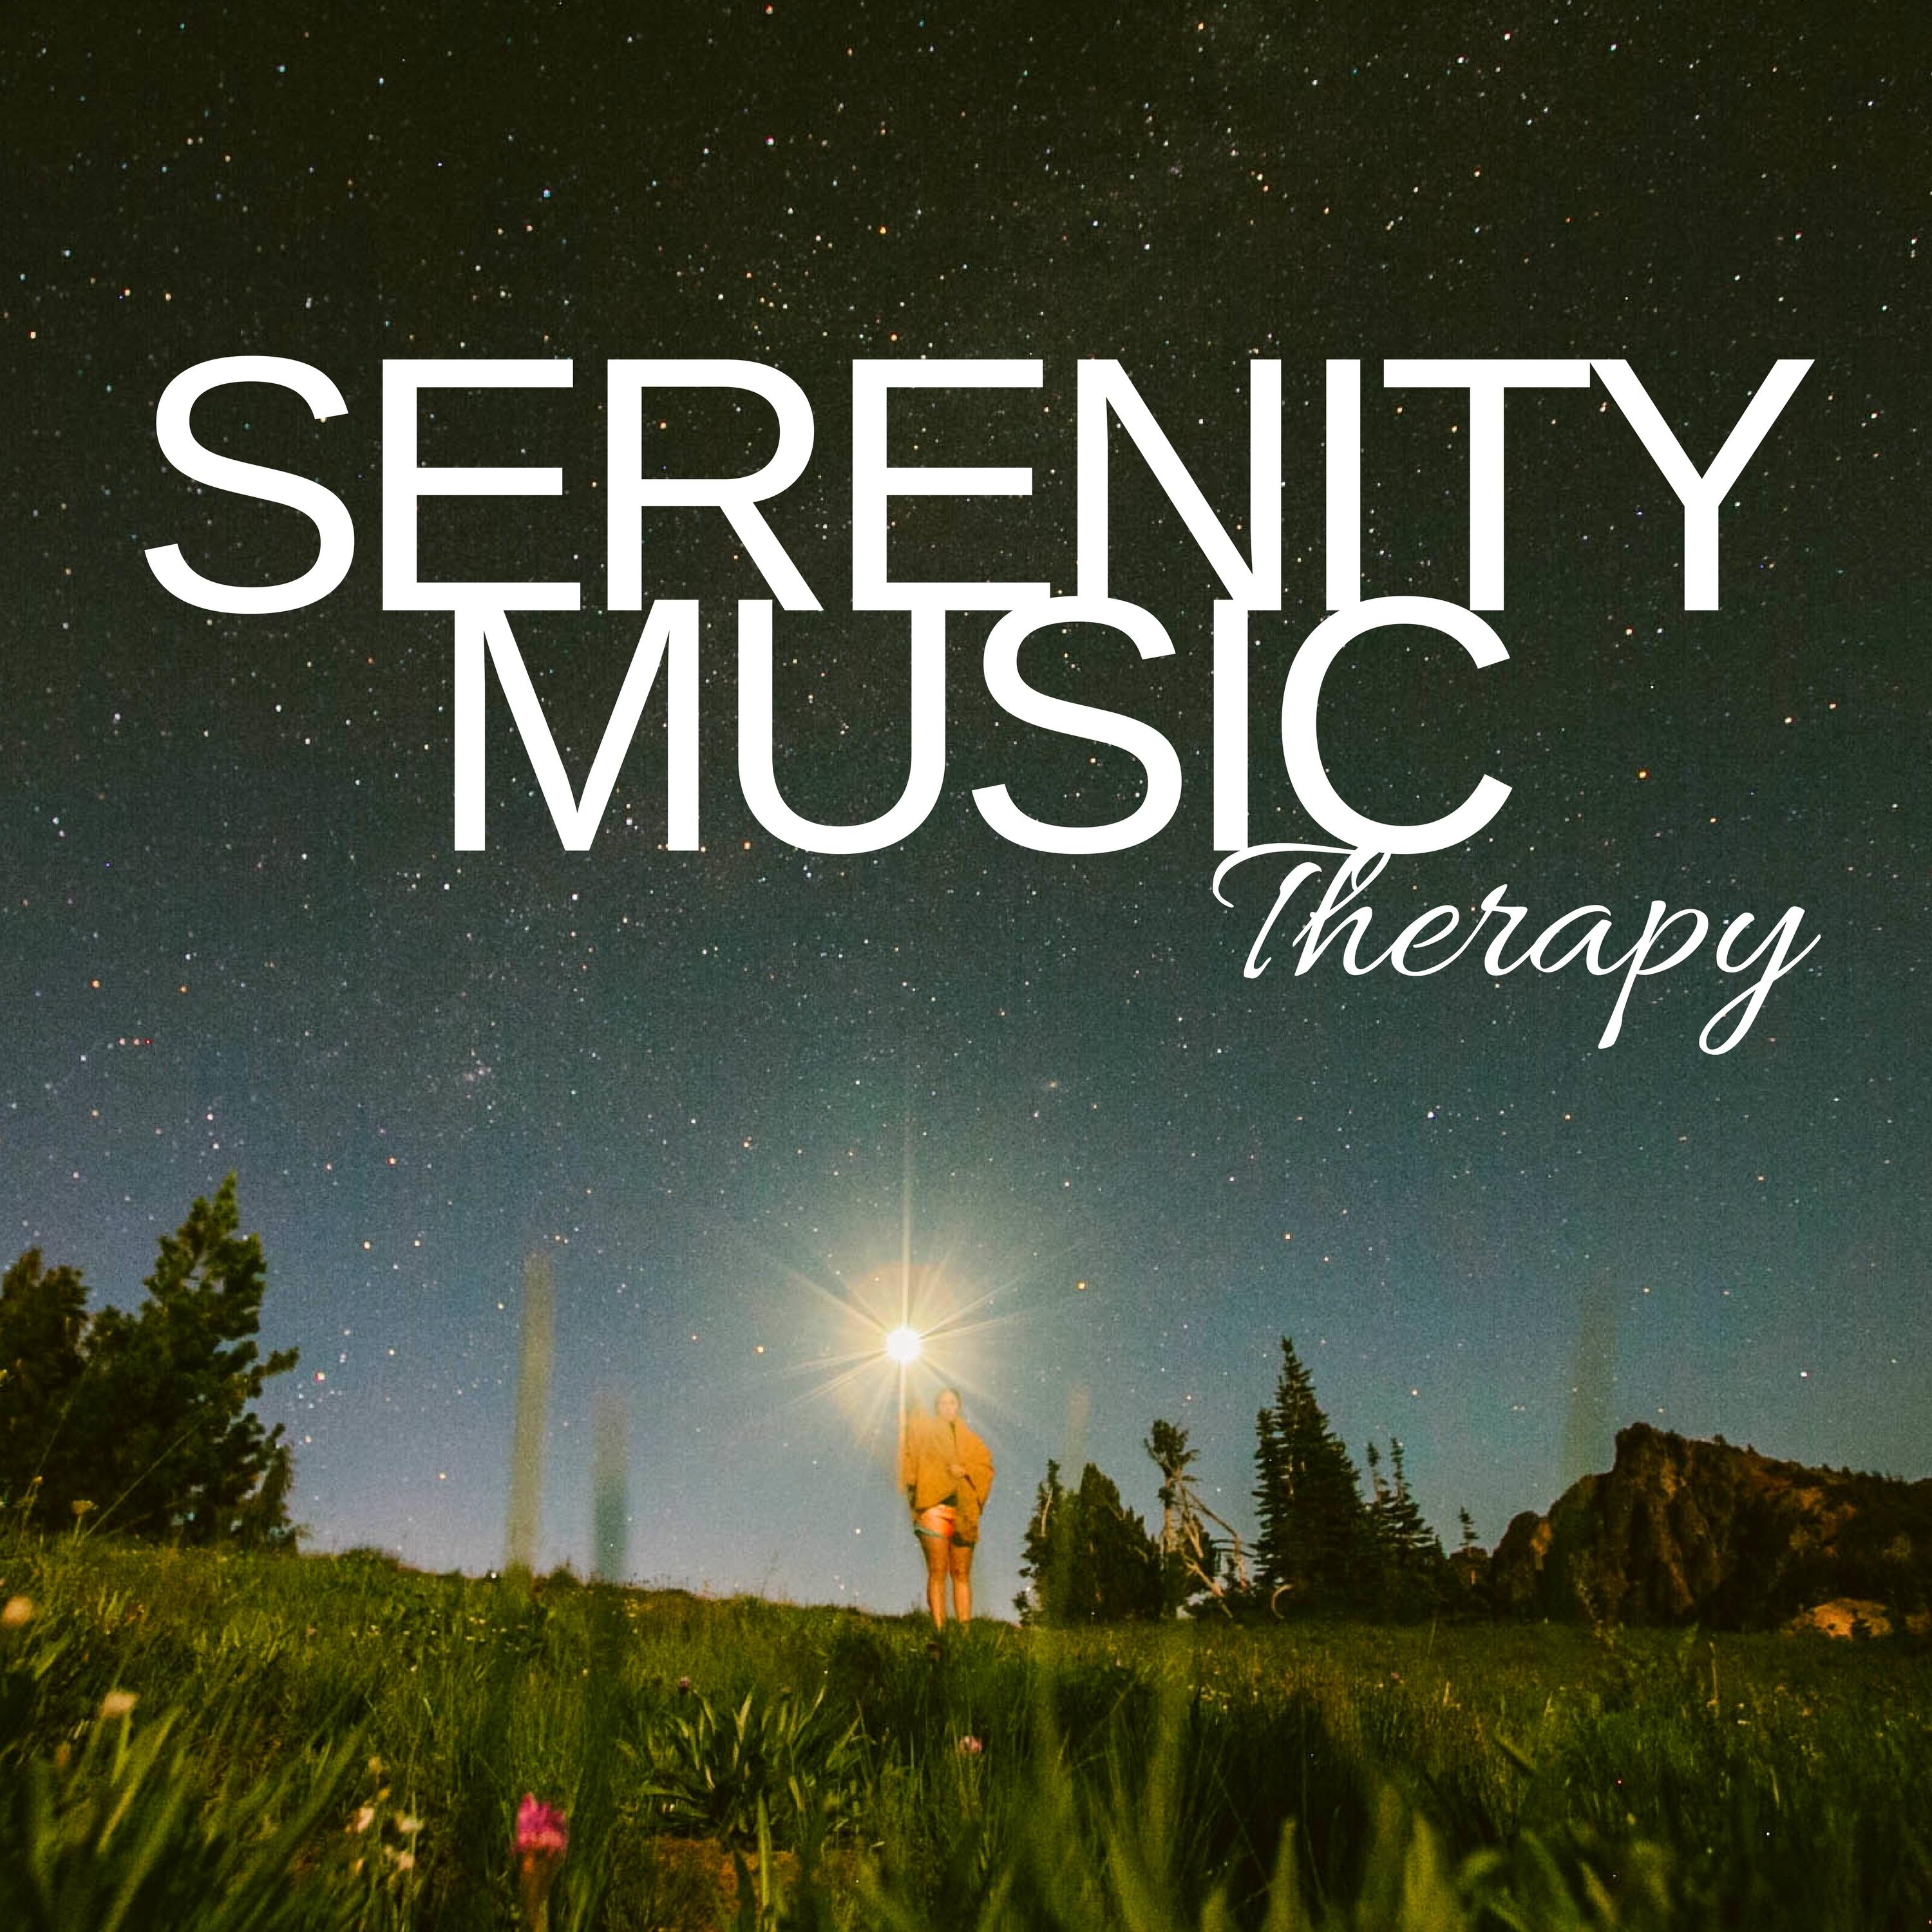 Serenity Music Therapy - Deep Sleep Therapy with Sounds of Nature, Soundscapes